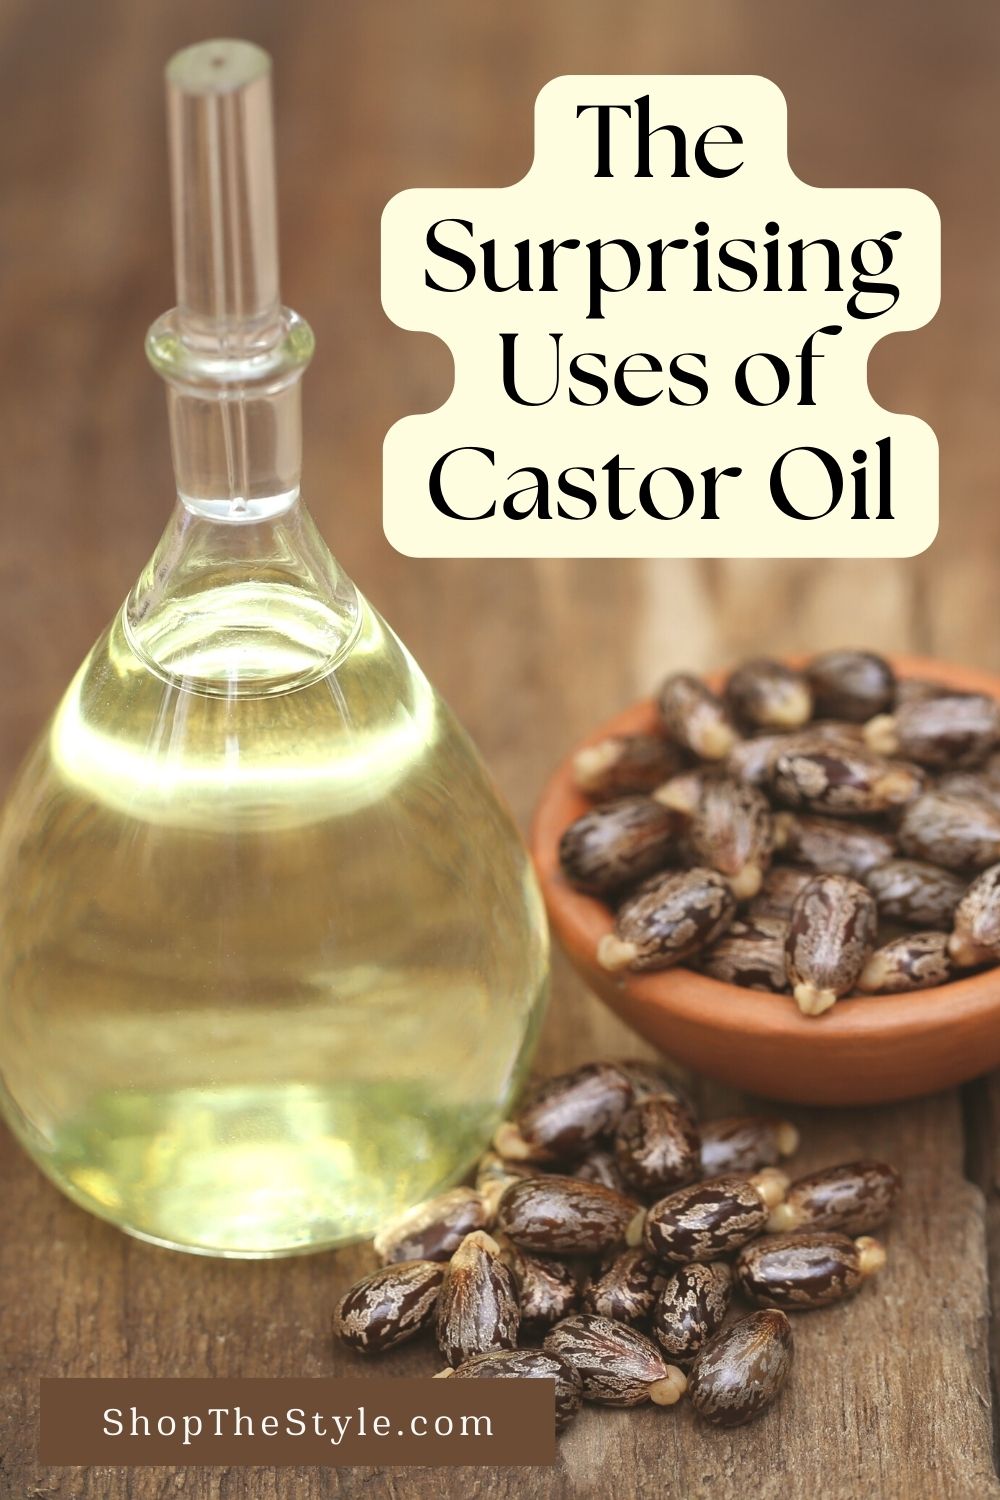 The Surprising Uses of Castor Oil